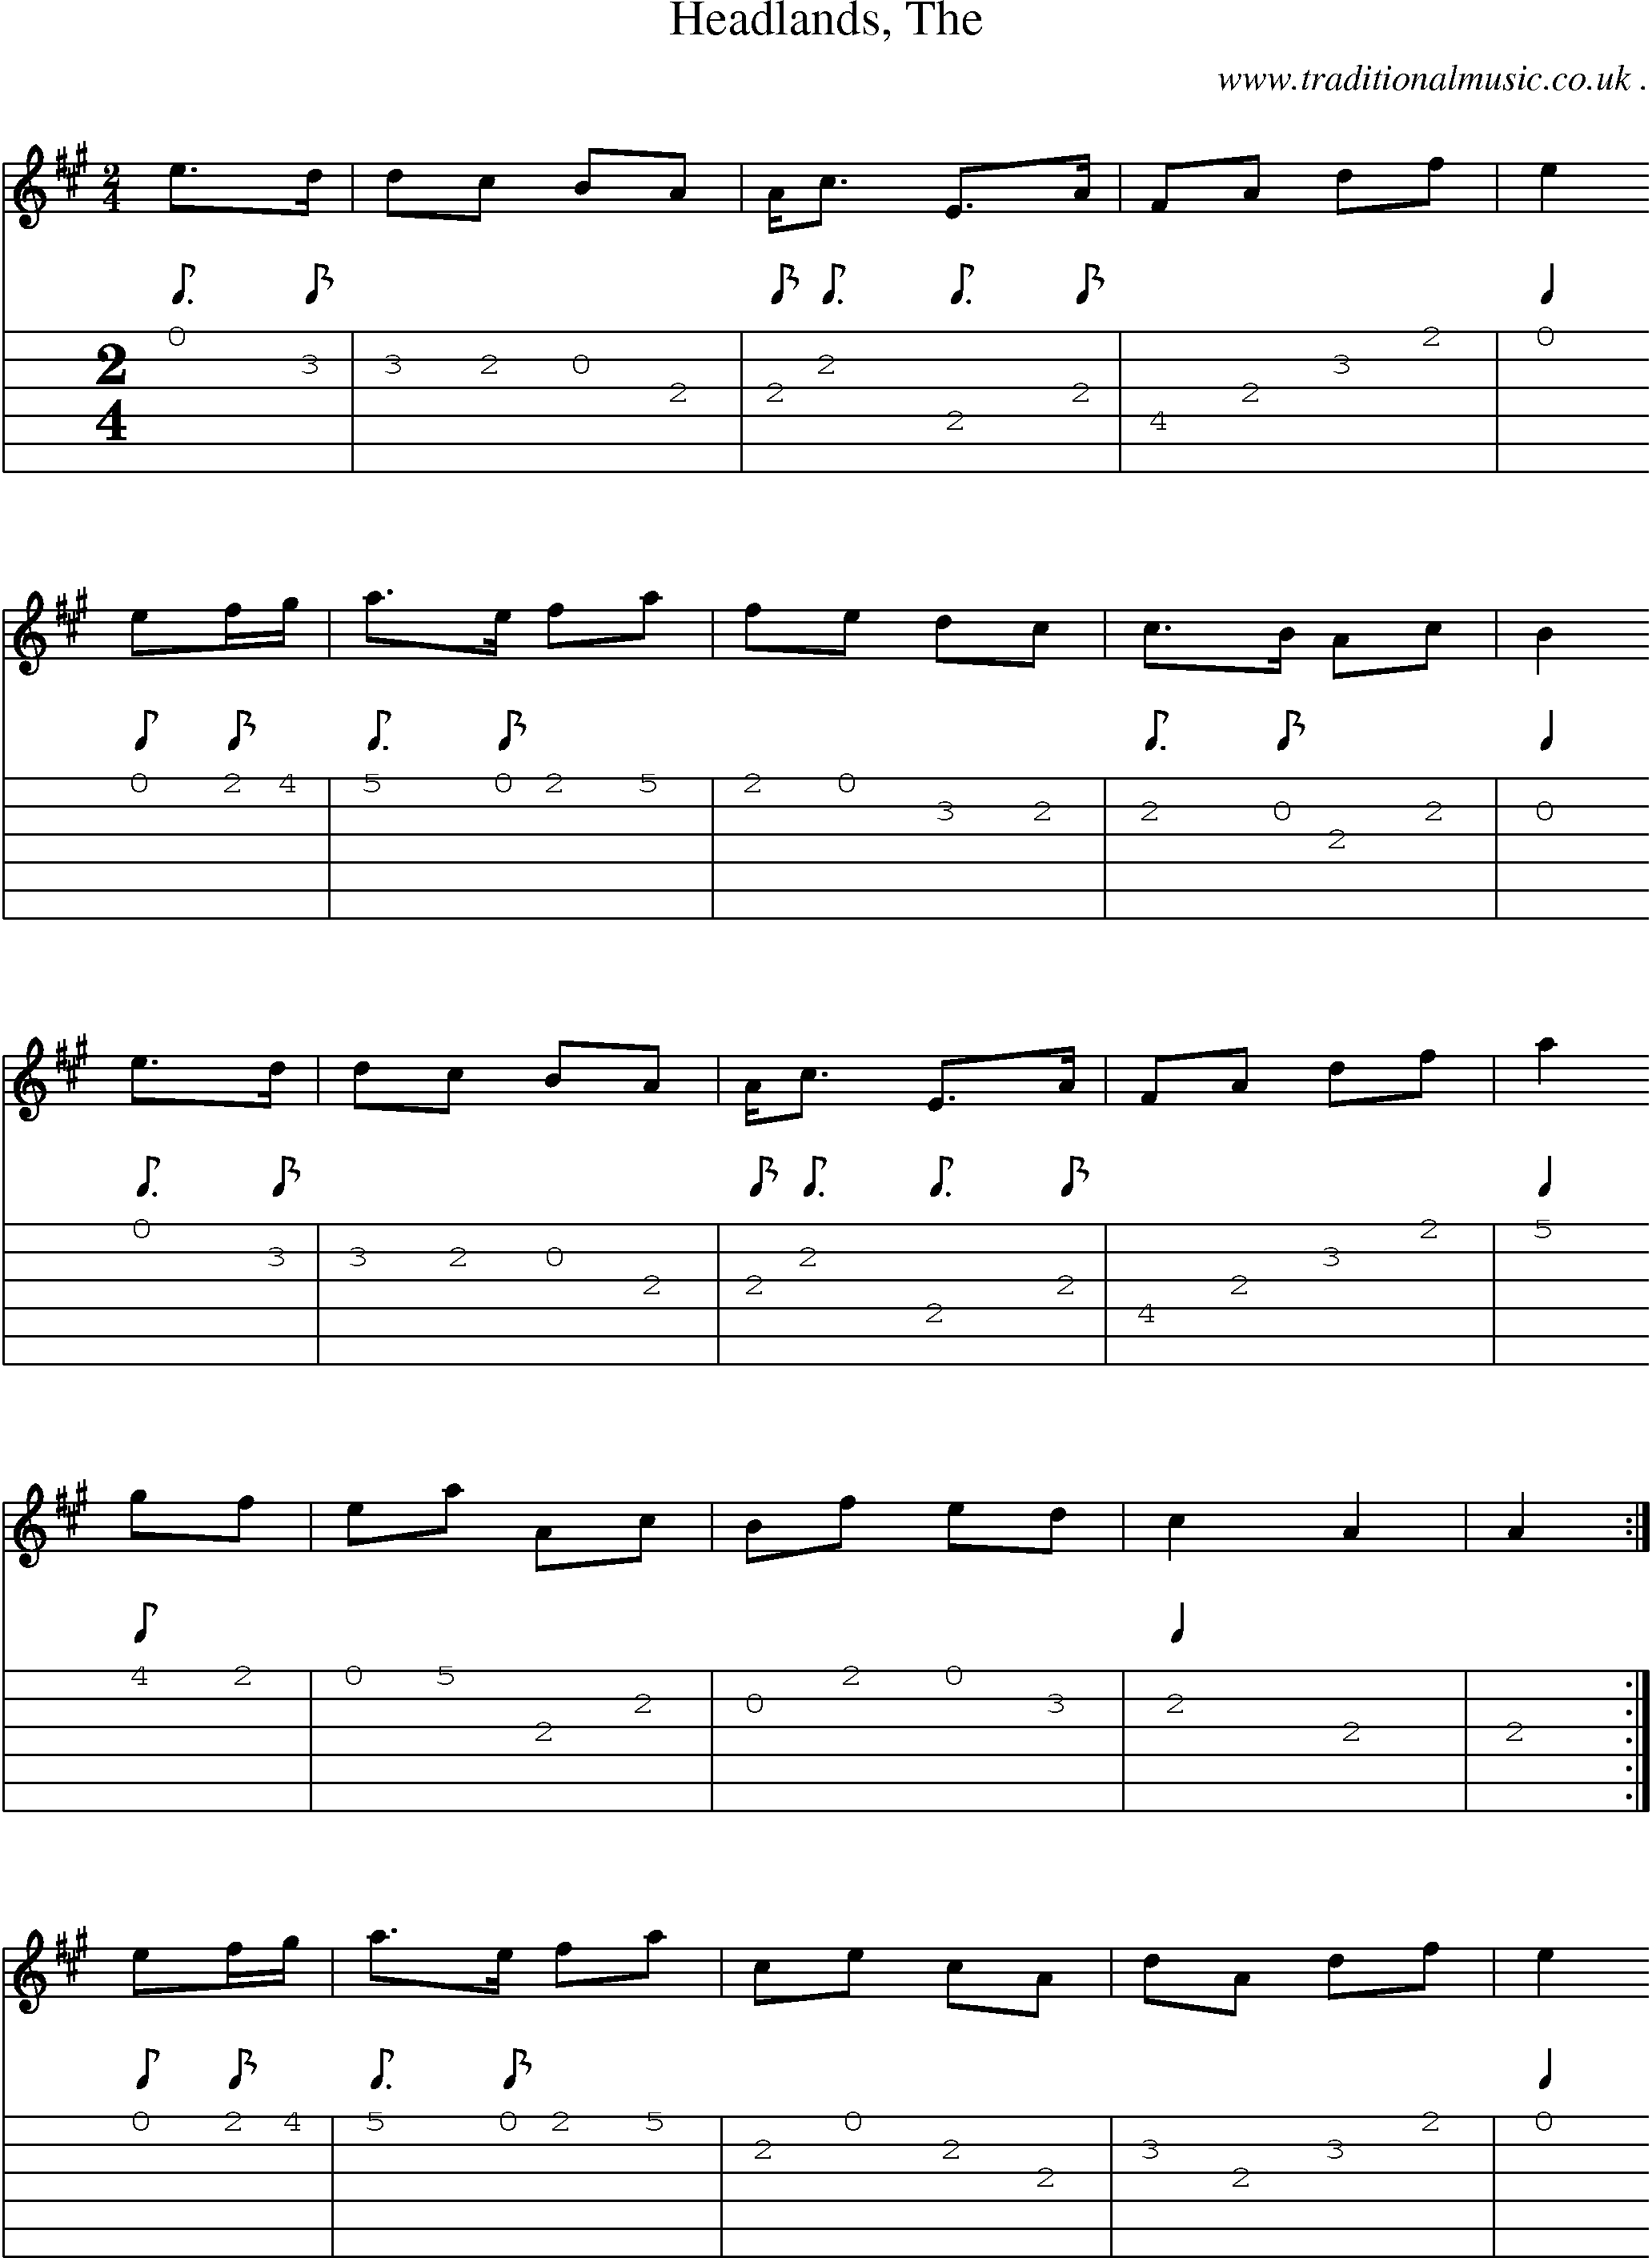 Sheet-music  score, Chords and Guitar Tabs for Headlands The